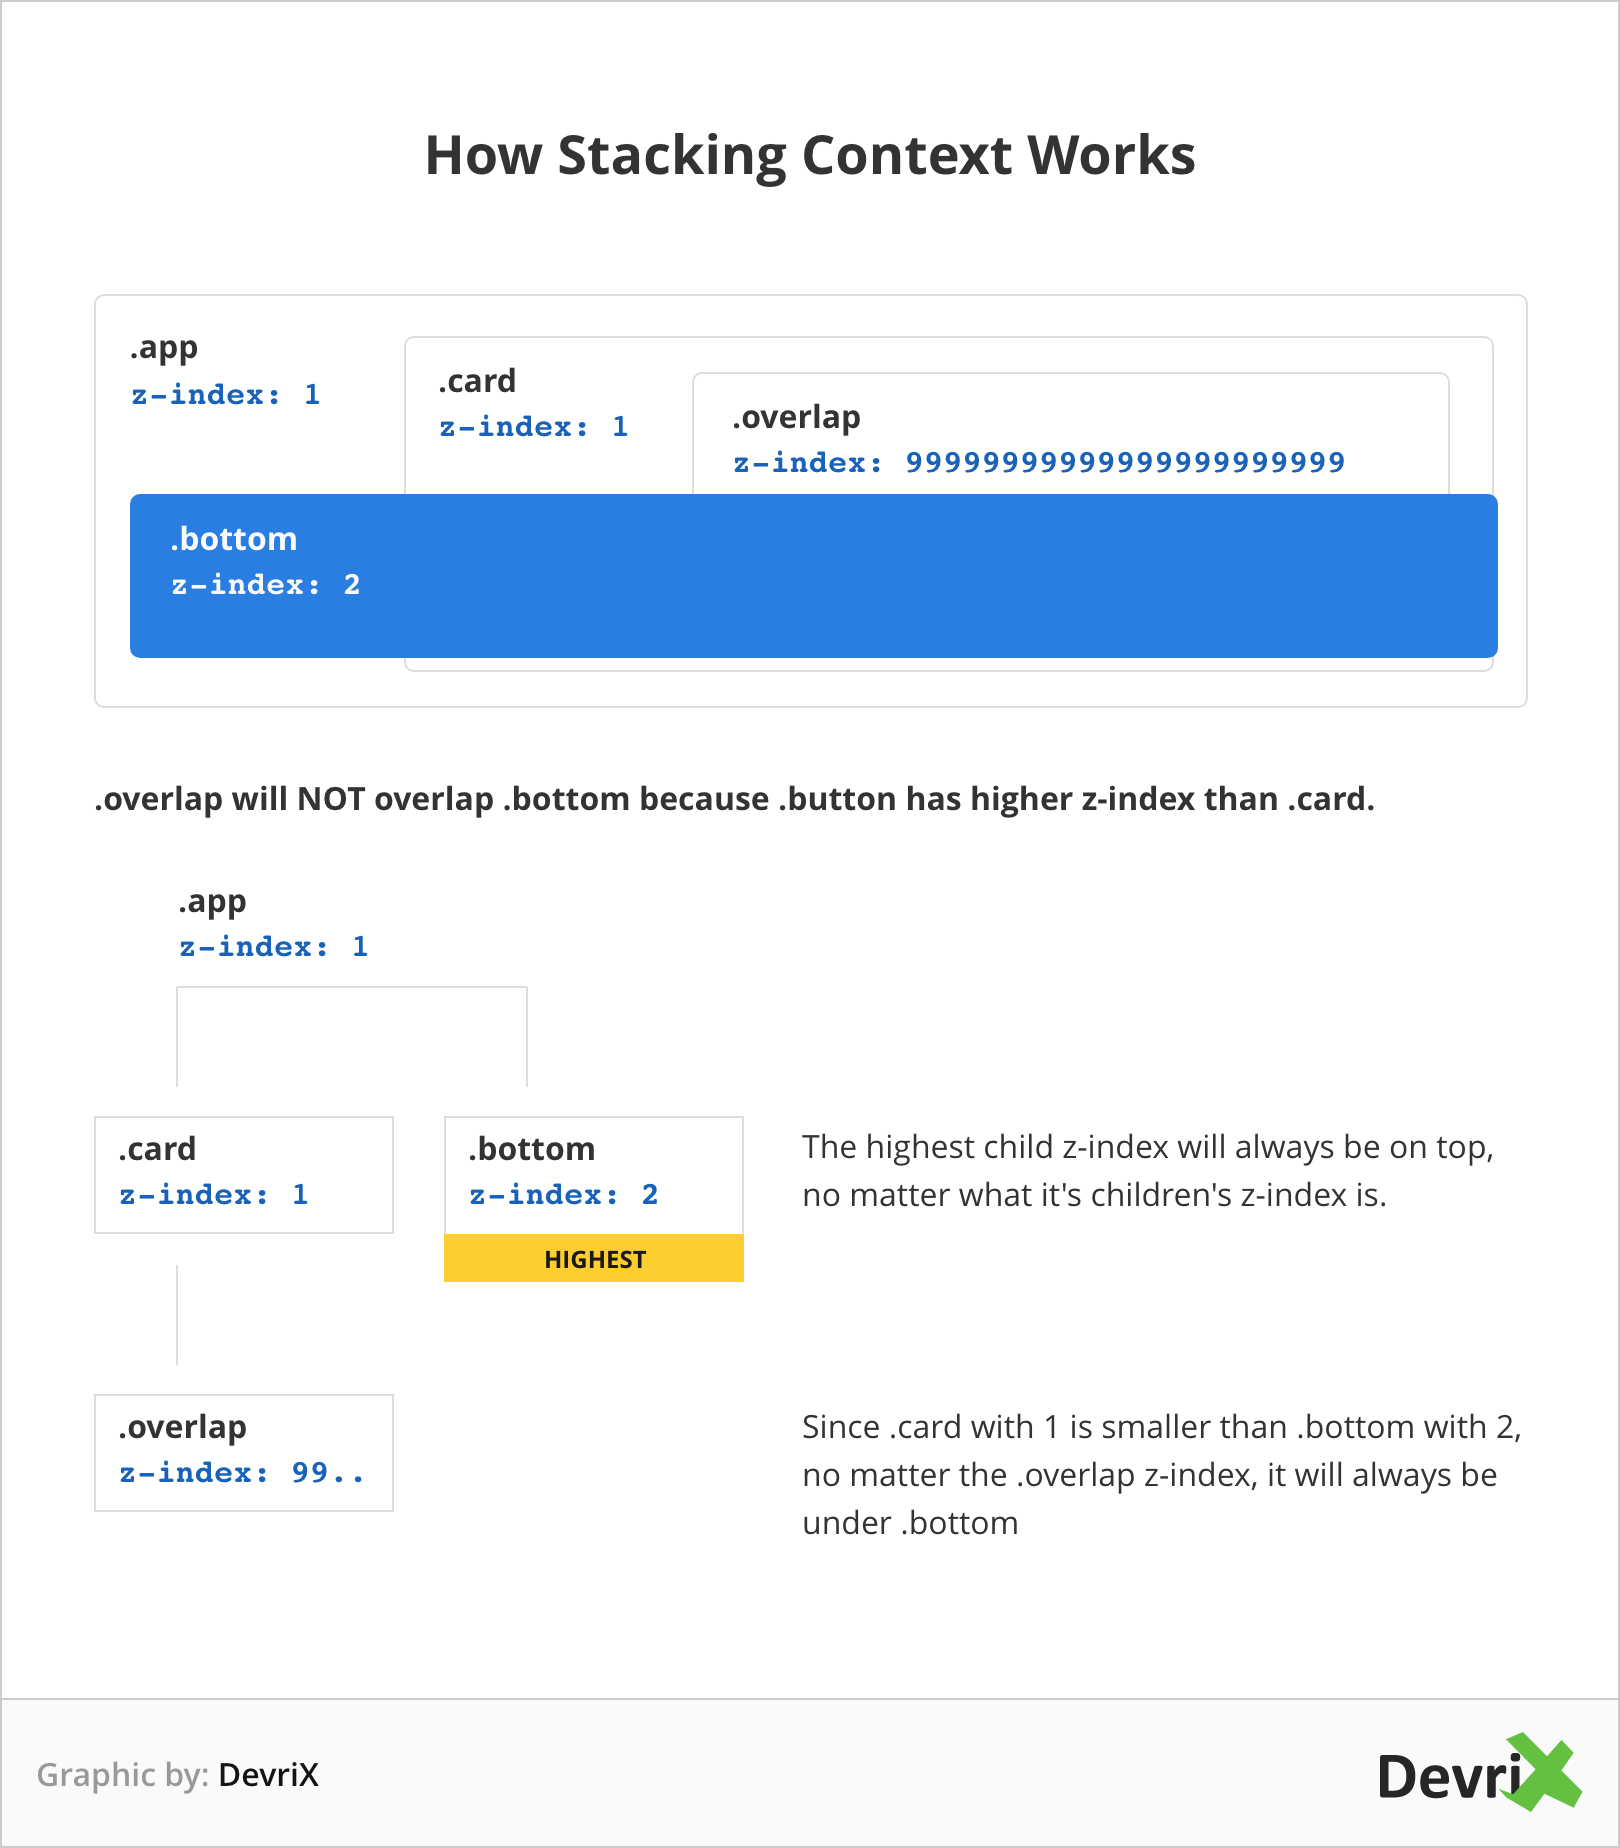 how stackimg context works